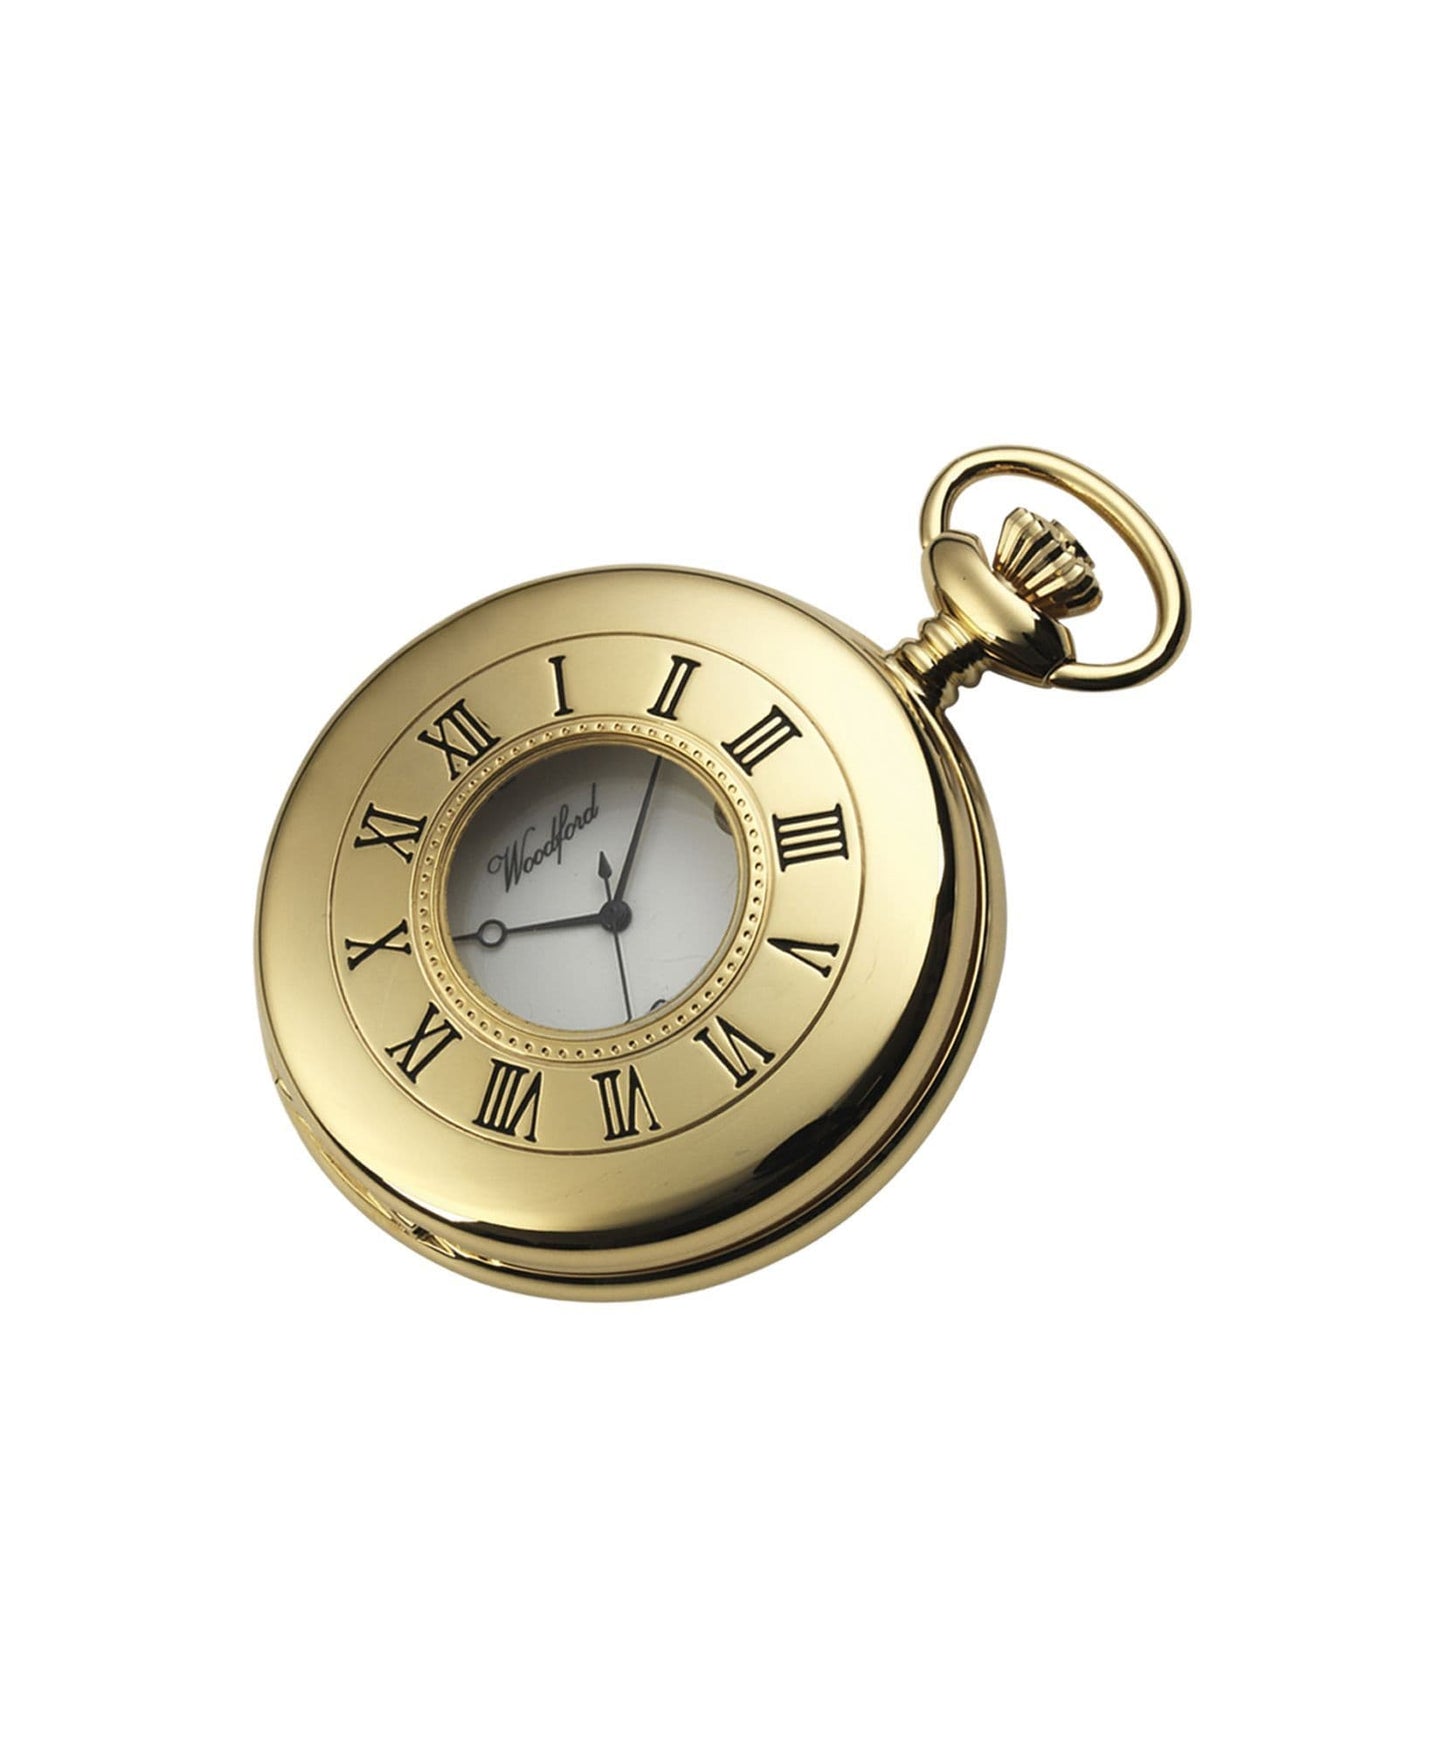 Mechanical Gold Plated Plain Half Hunter Pocket Watch With Chain